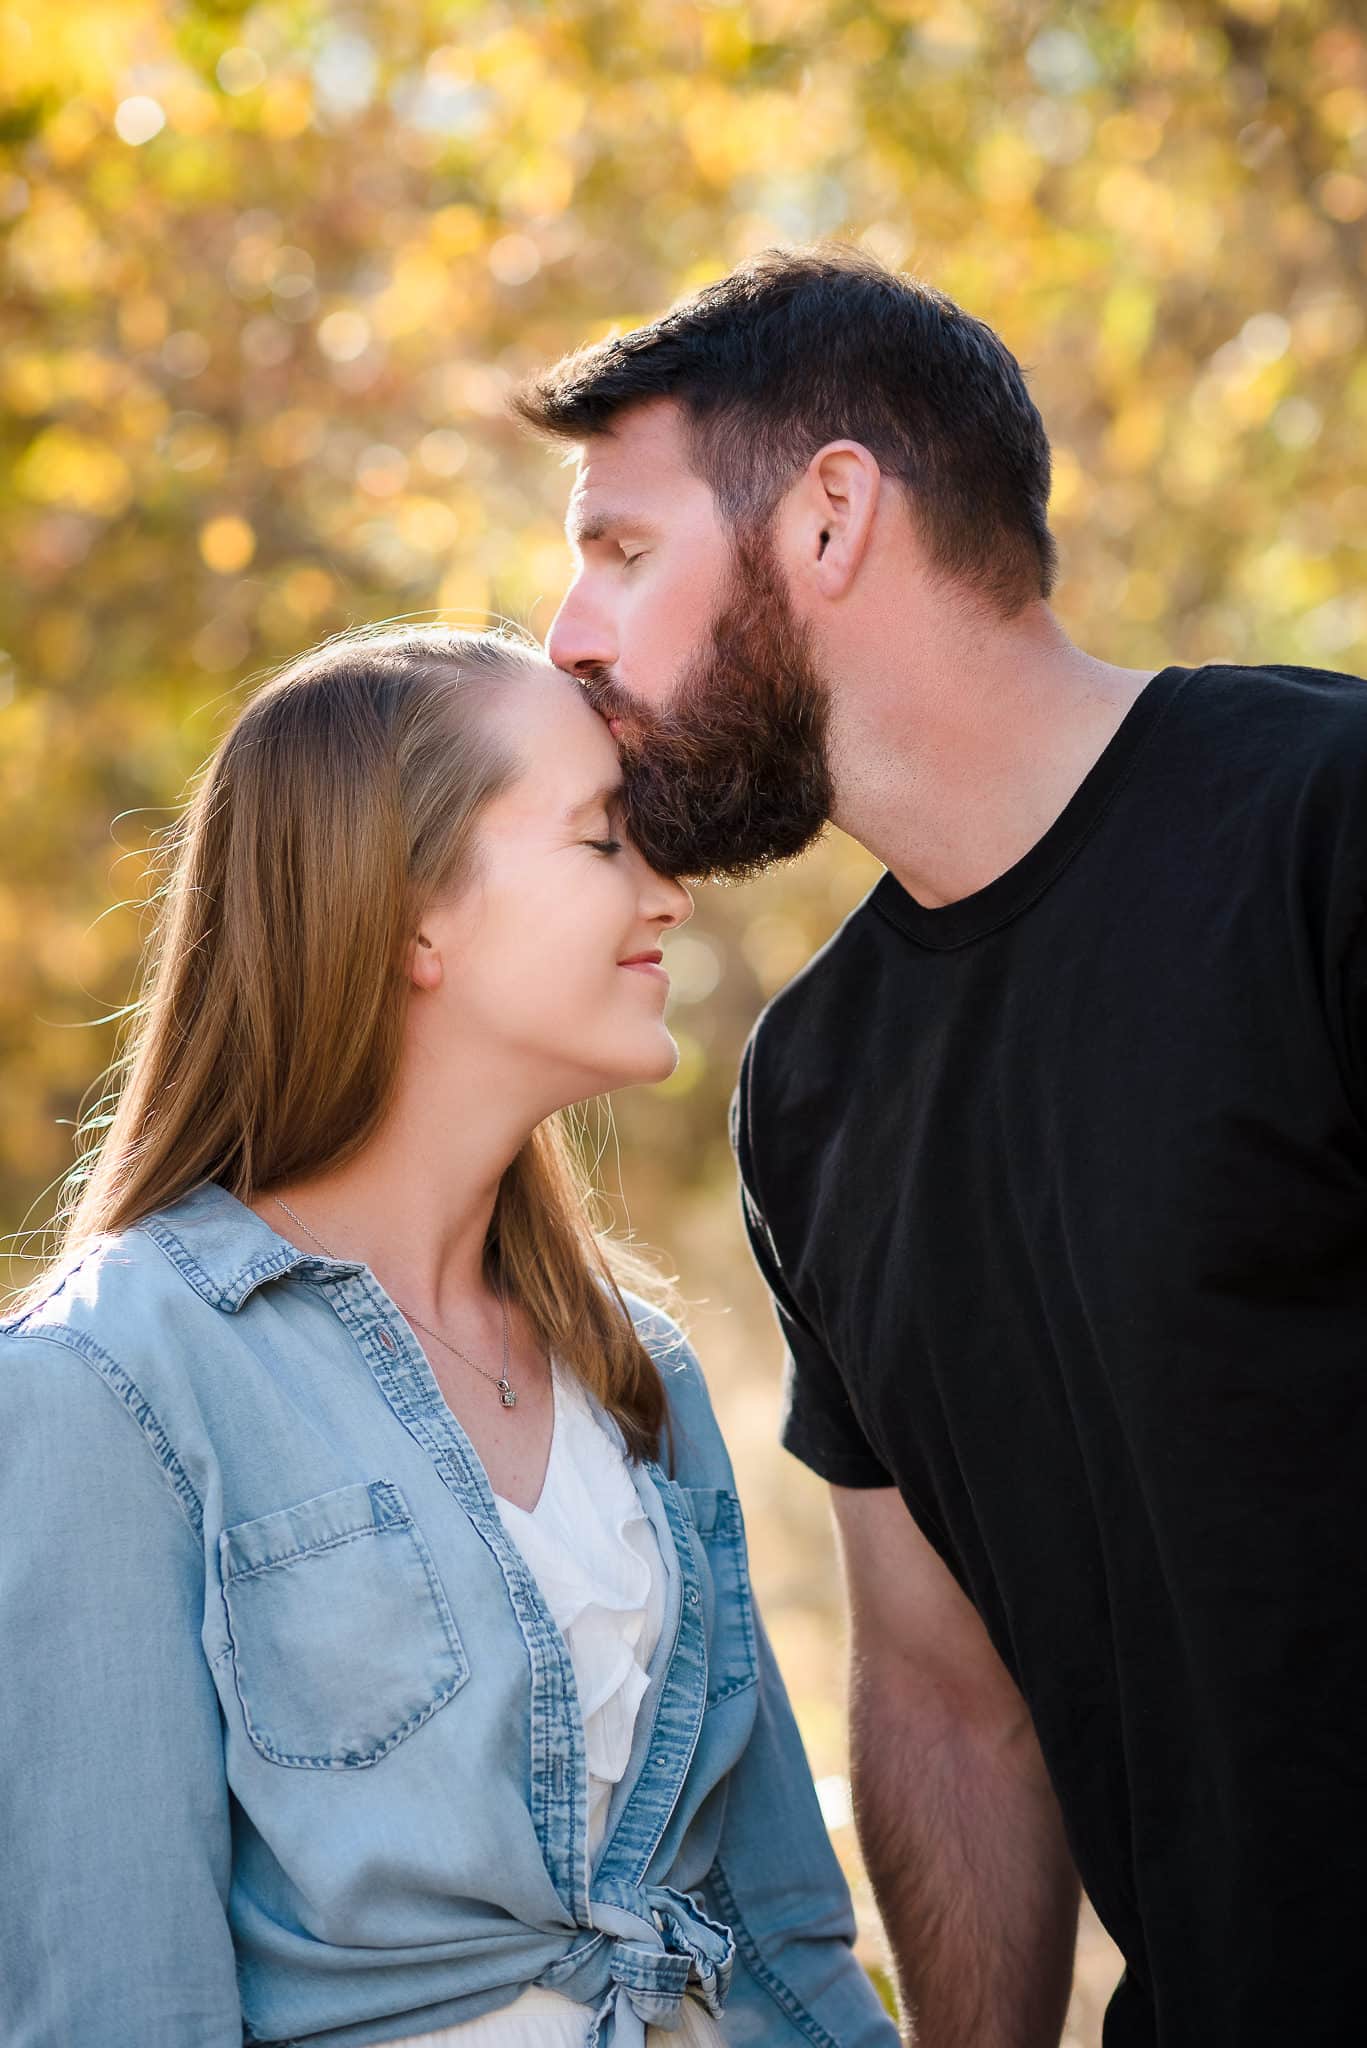 A man kisses his girlfriend on the forehead during their photo engagement session.